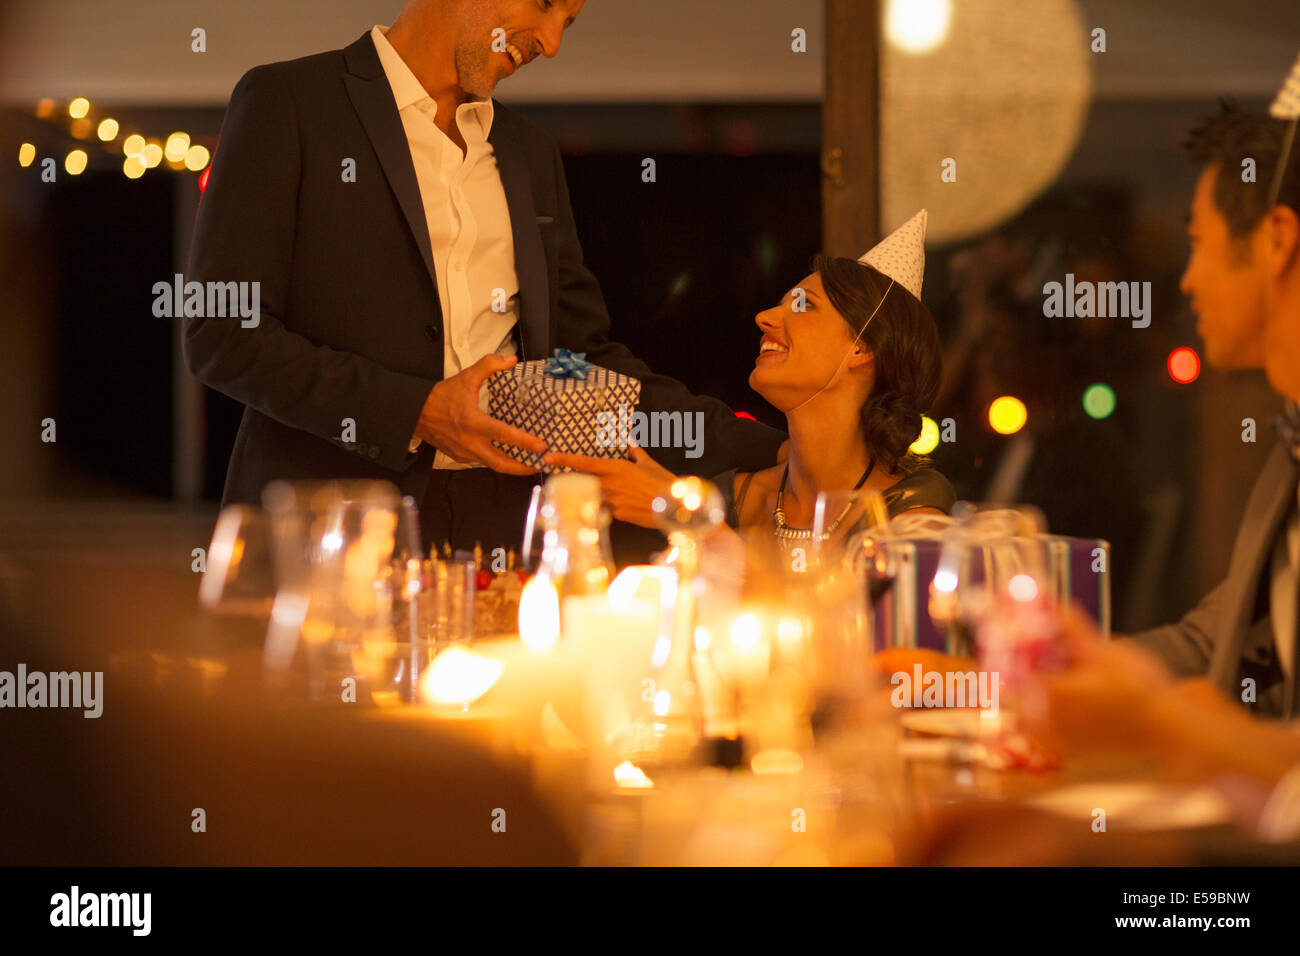 Man giving wife gift at Birthday party Banque D'Images